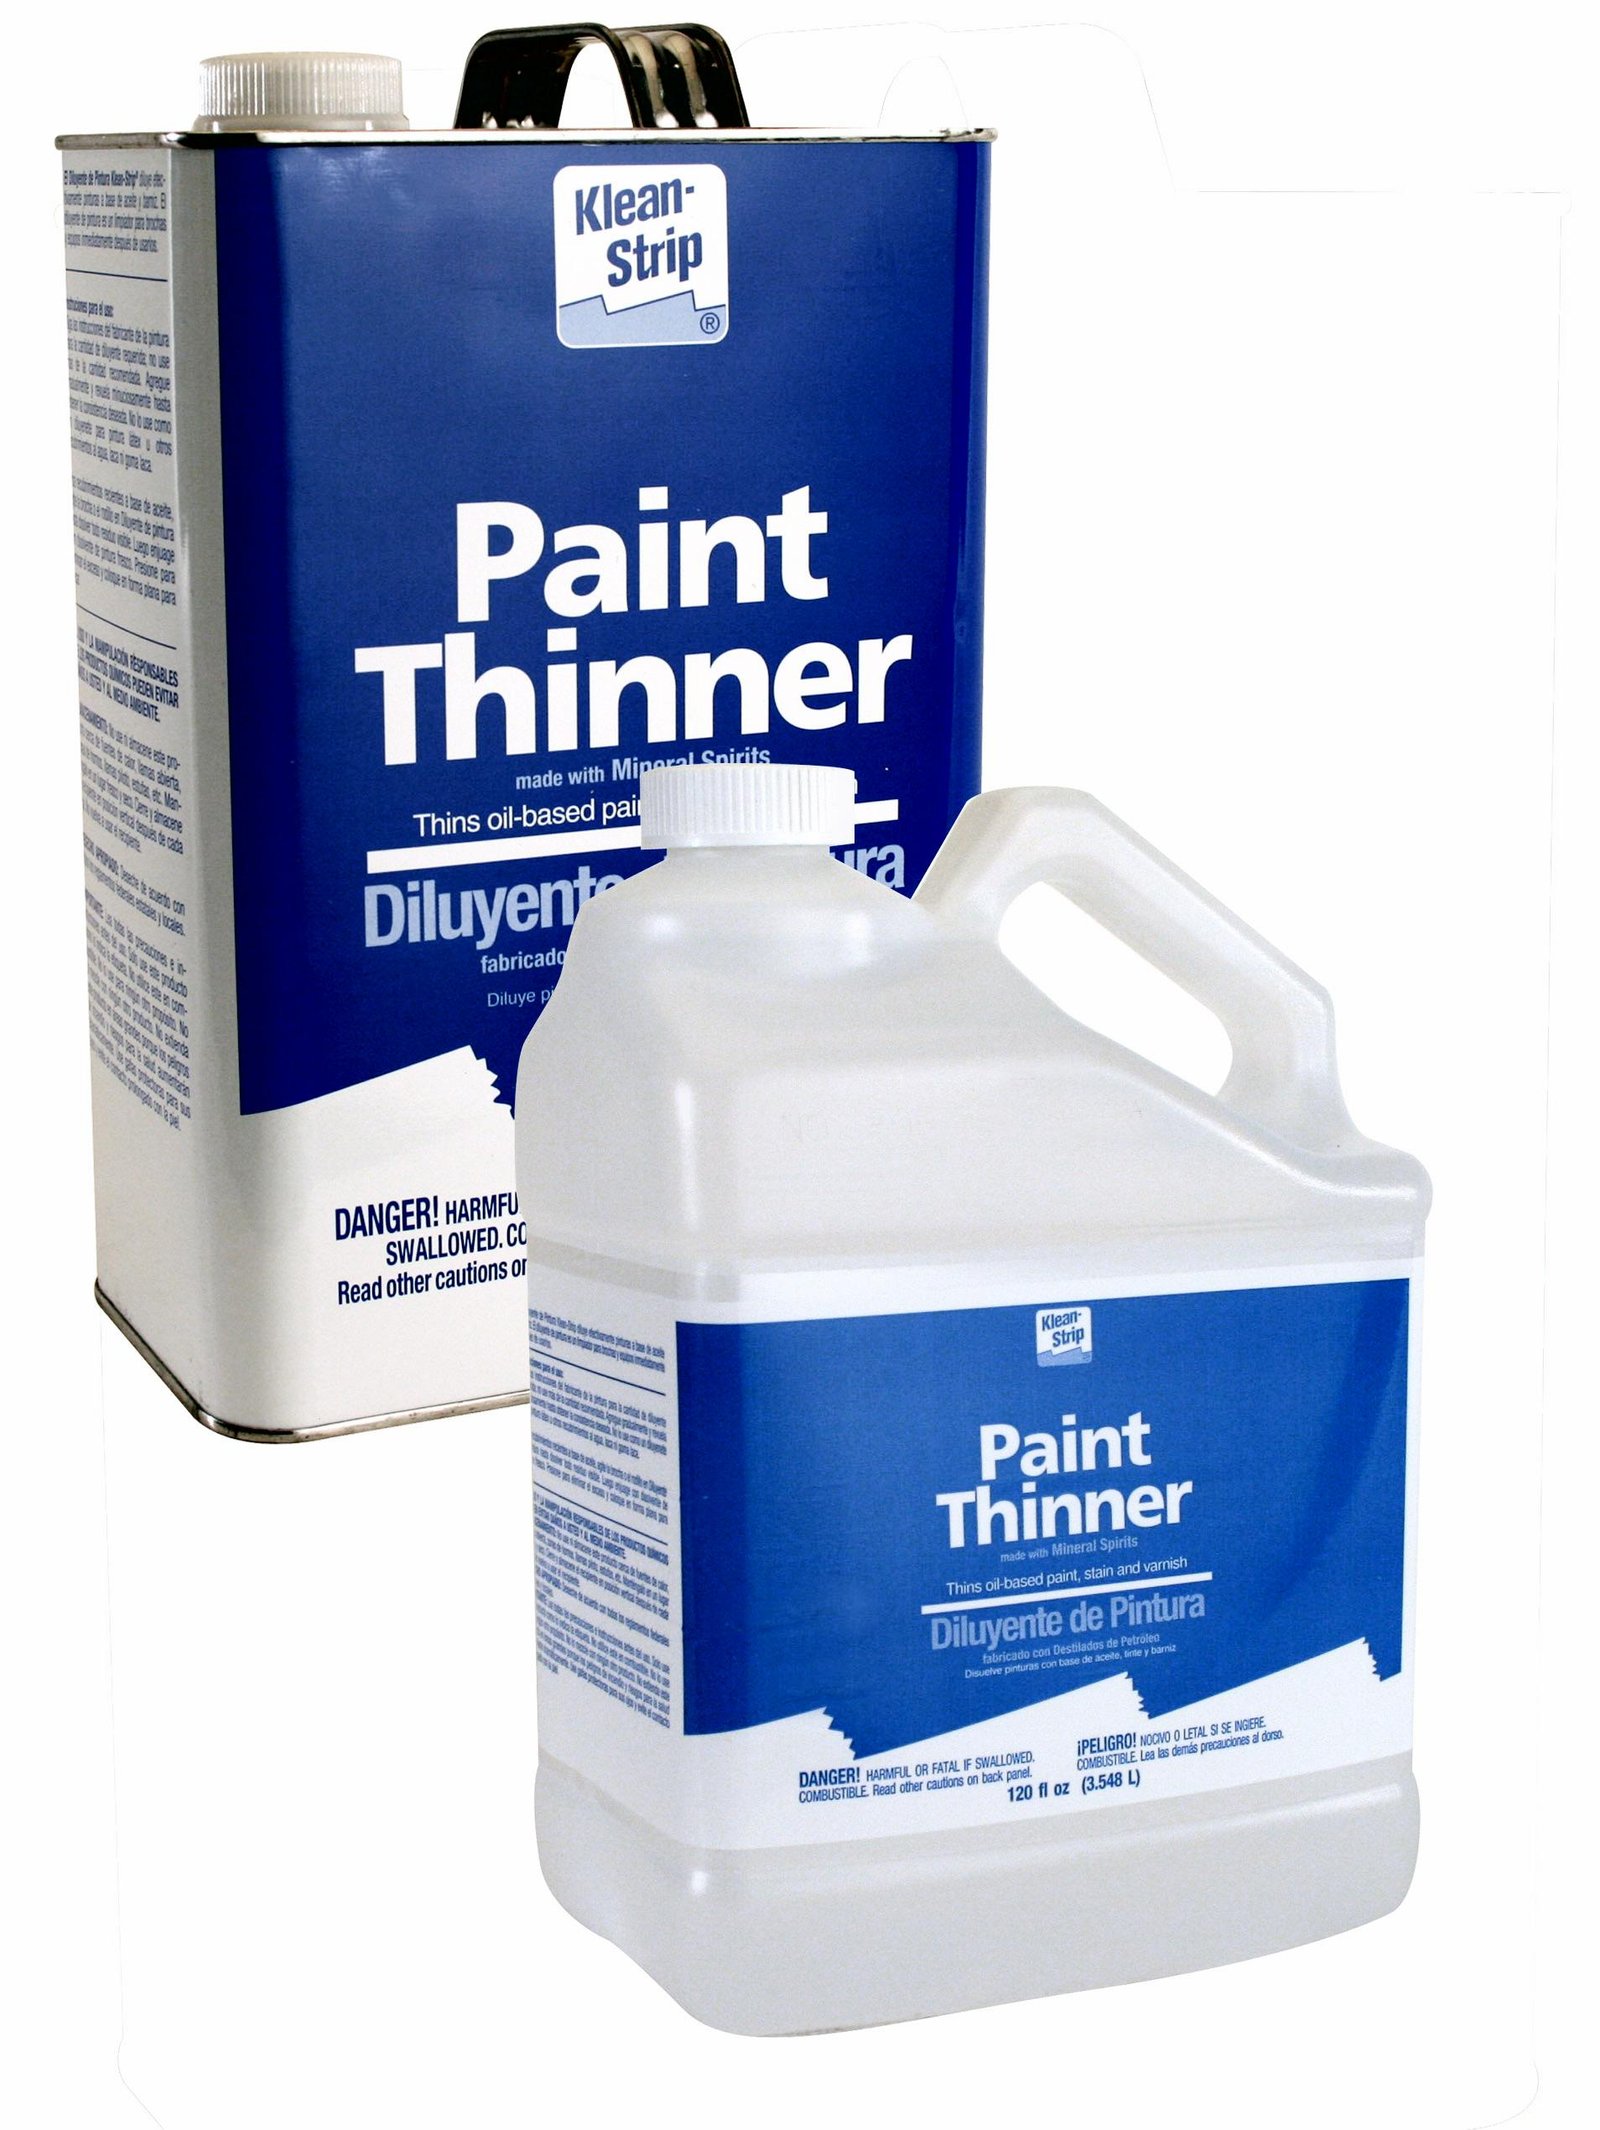 What You Need to Know about Paint Thinners